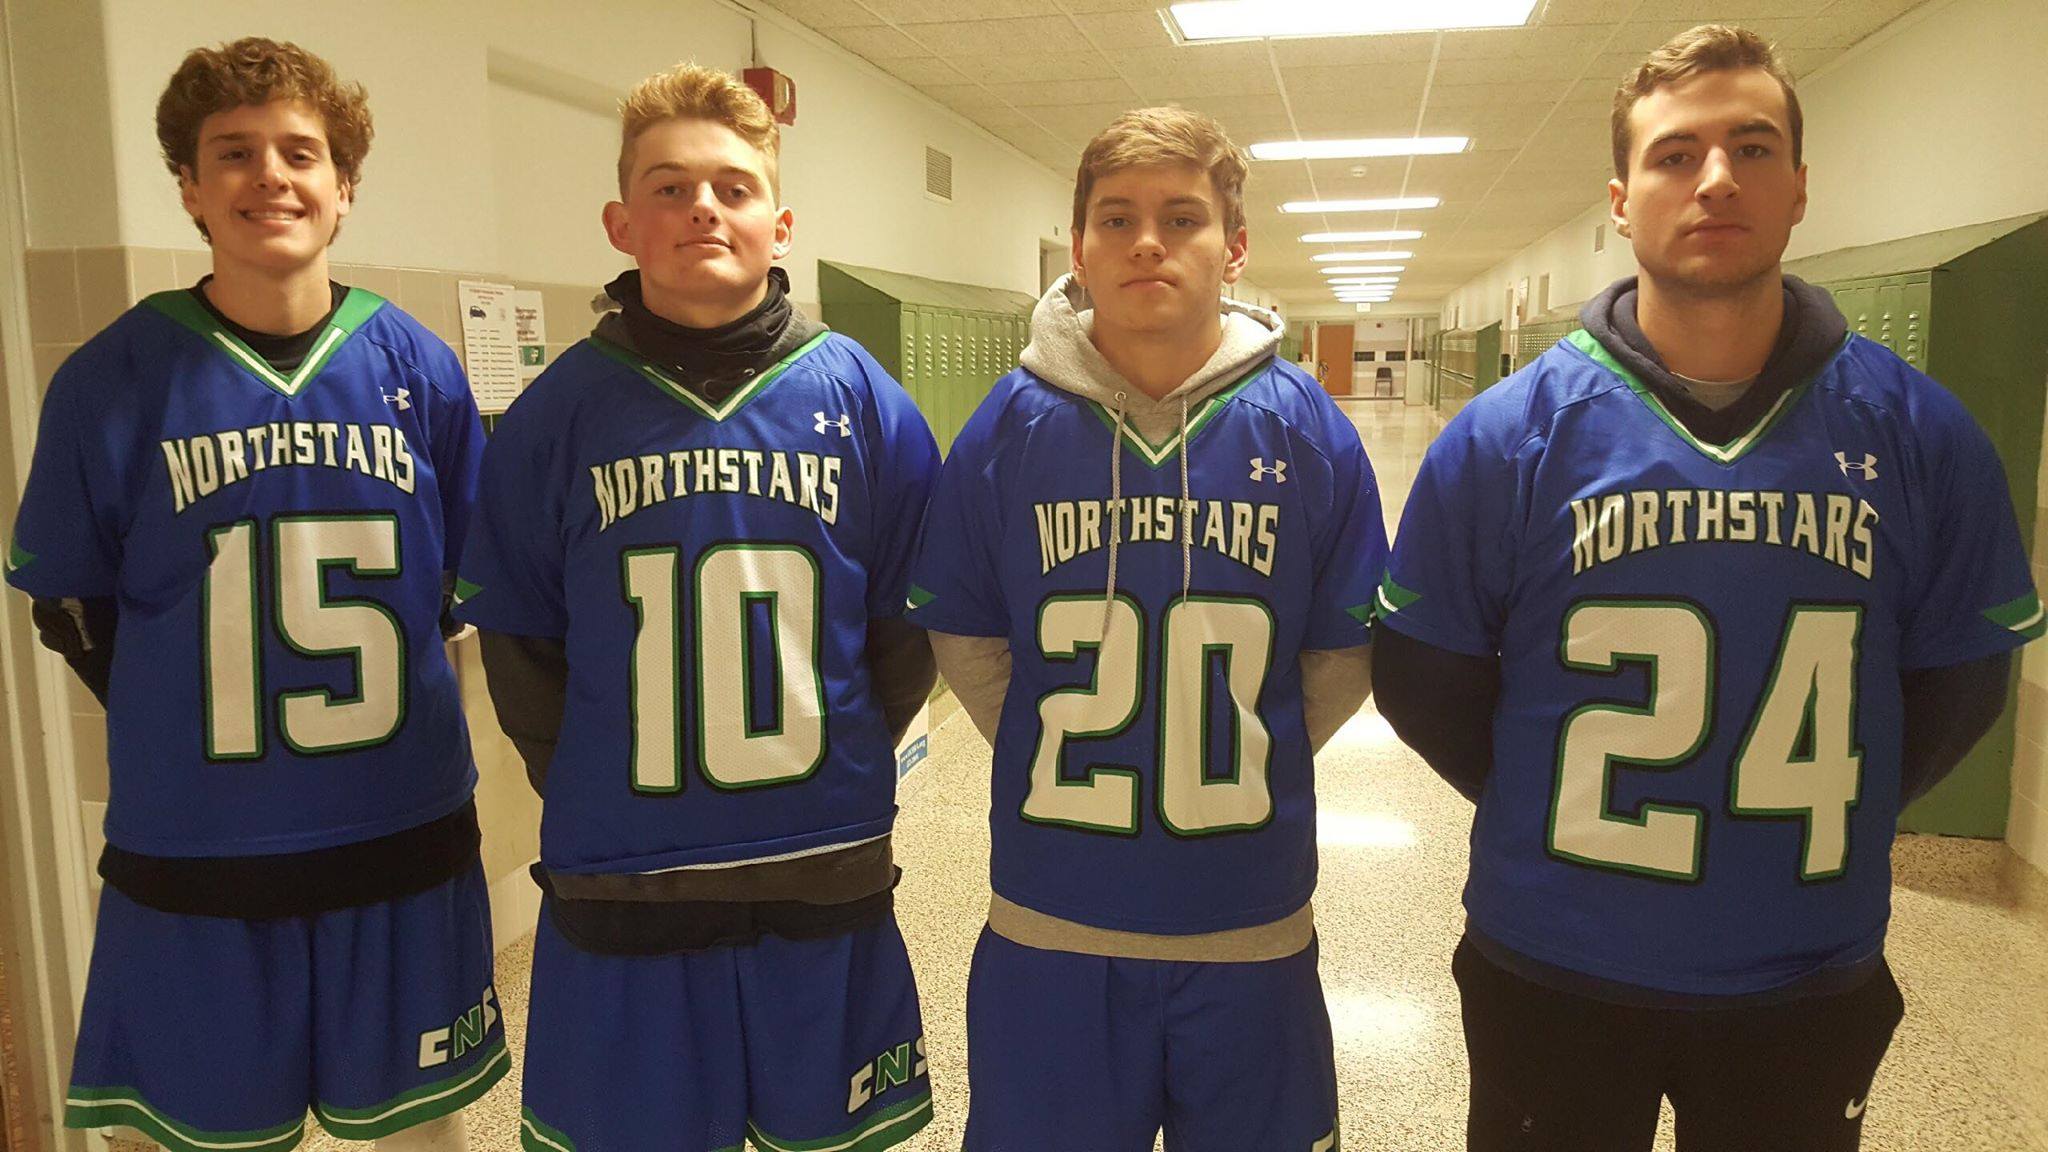 EPISODE 77 of 2018 - Dan Tortora gathers info from ACC Football Coaches on 2018 Season & Spotlights CNS Northstars' Lacrosse with plenty of Special Guests